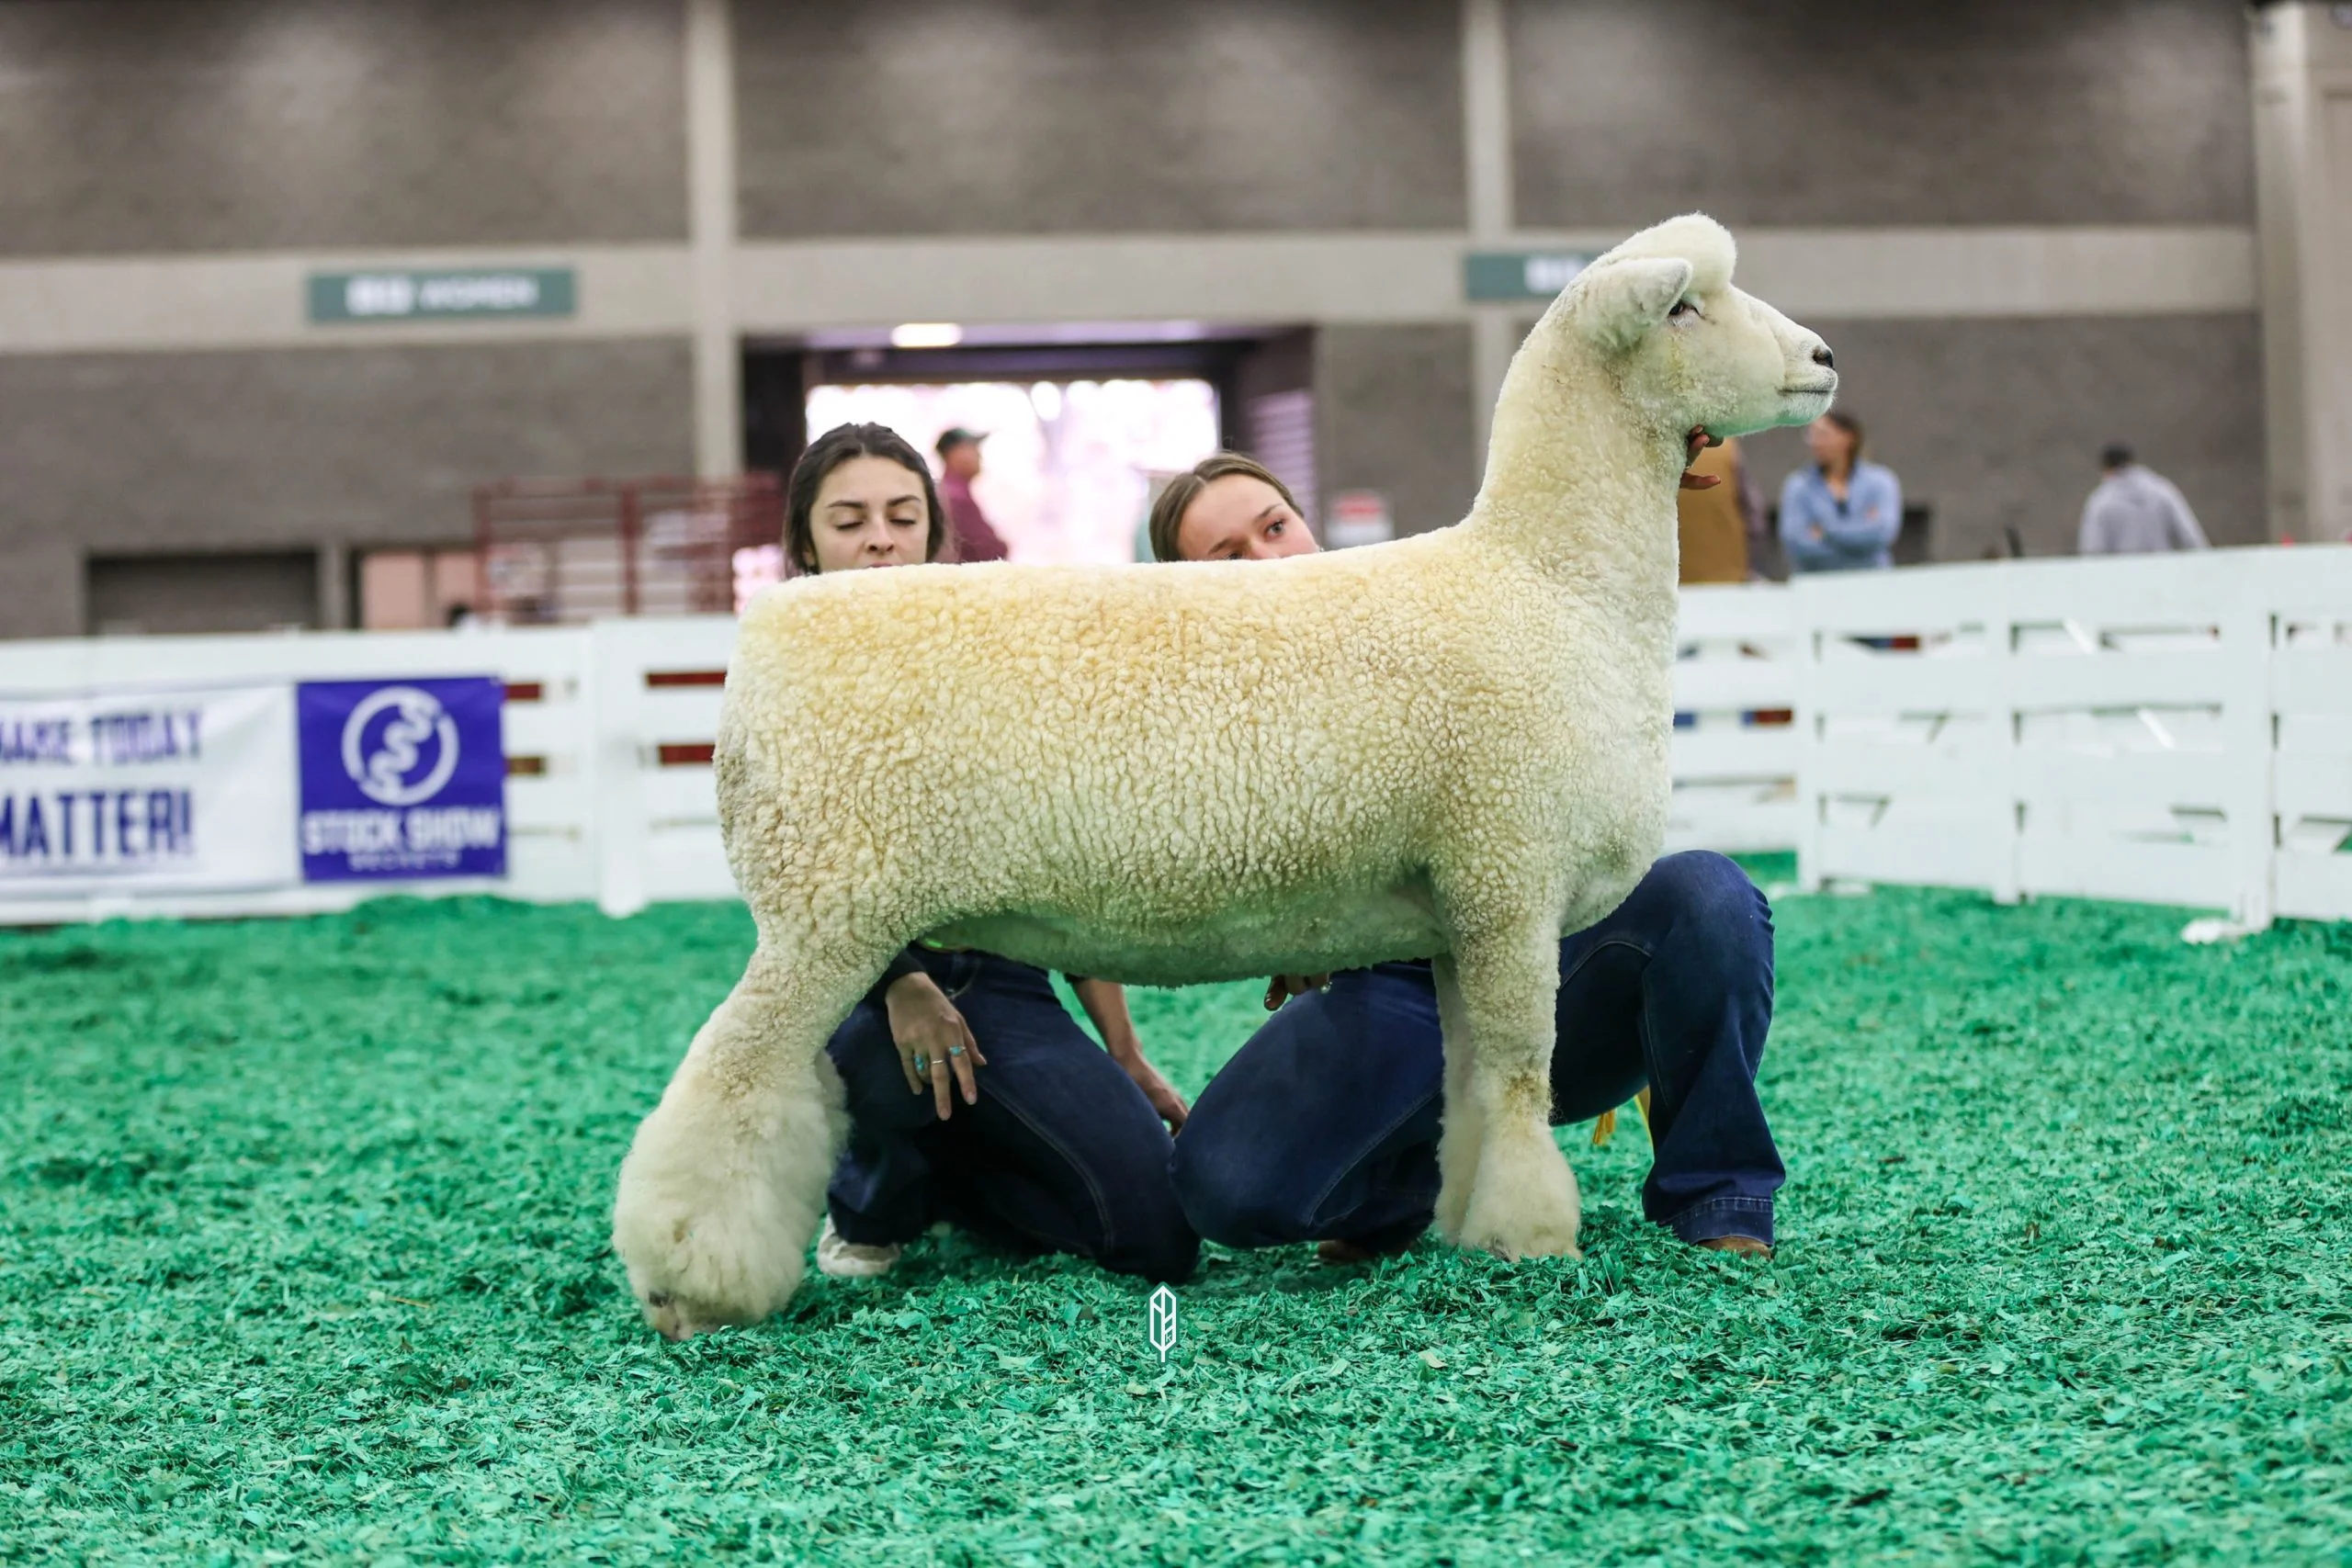 2023 National White Romney Show at NAILE
1st place yearling ewe exhibited by Catherine Hromis of Winding Wicks